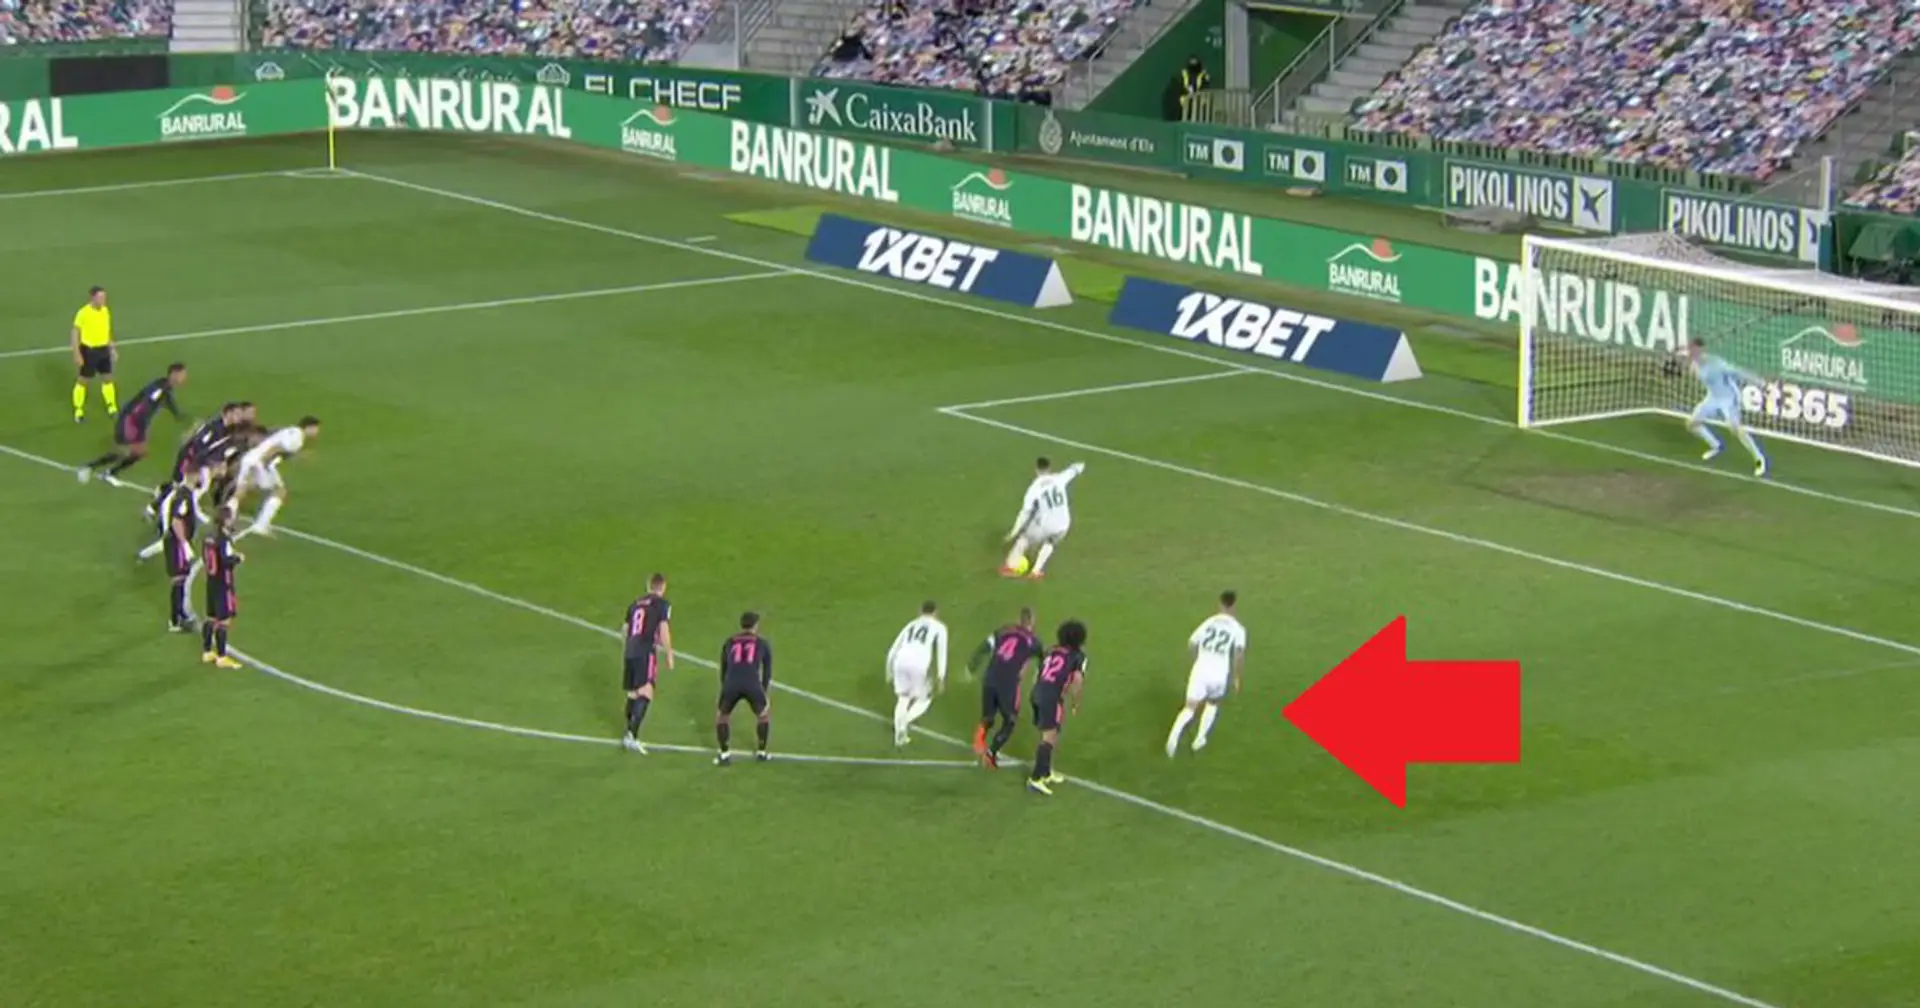 They say VAR help Madrid? One game episode proves Elche were lucky to secure draw 